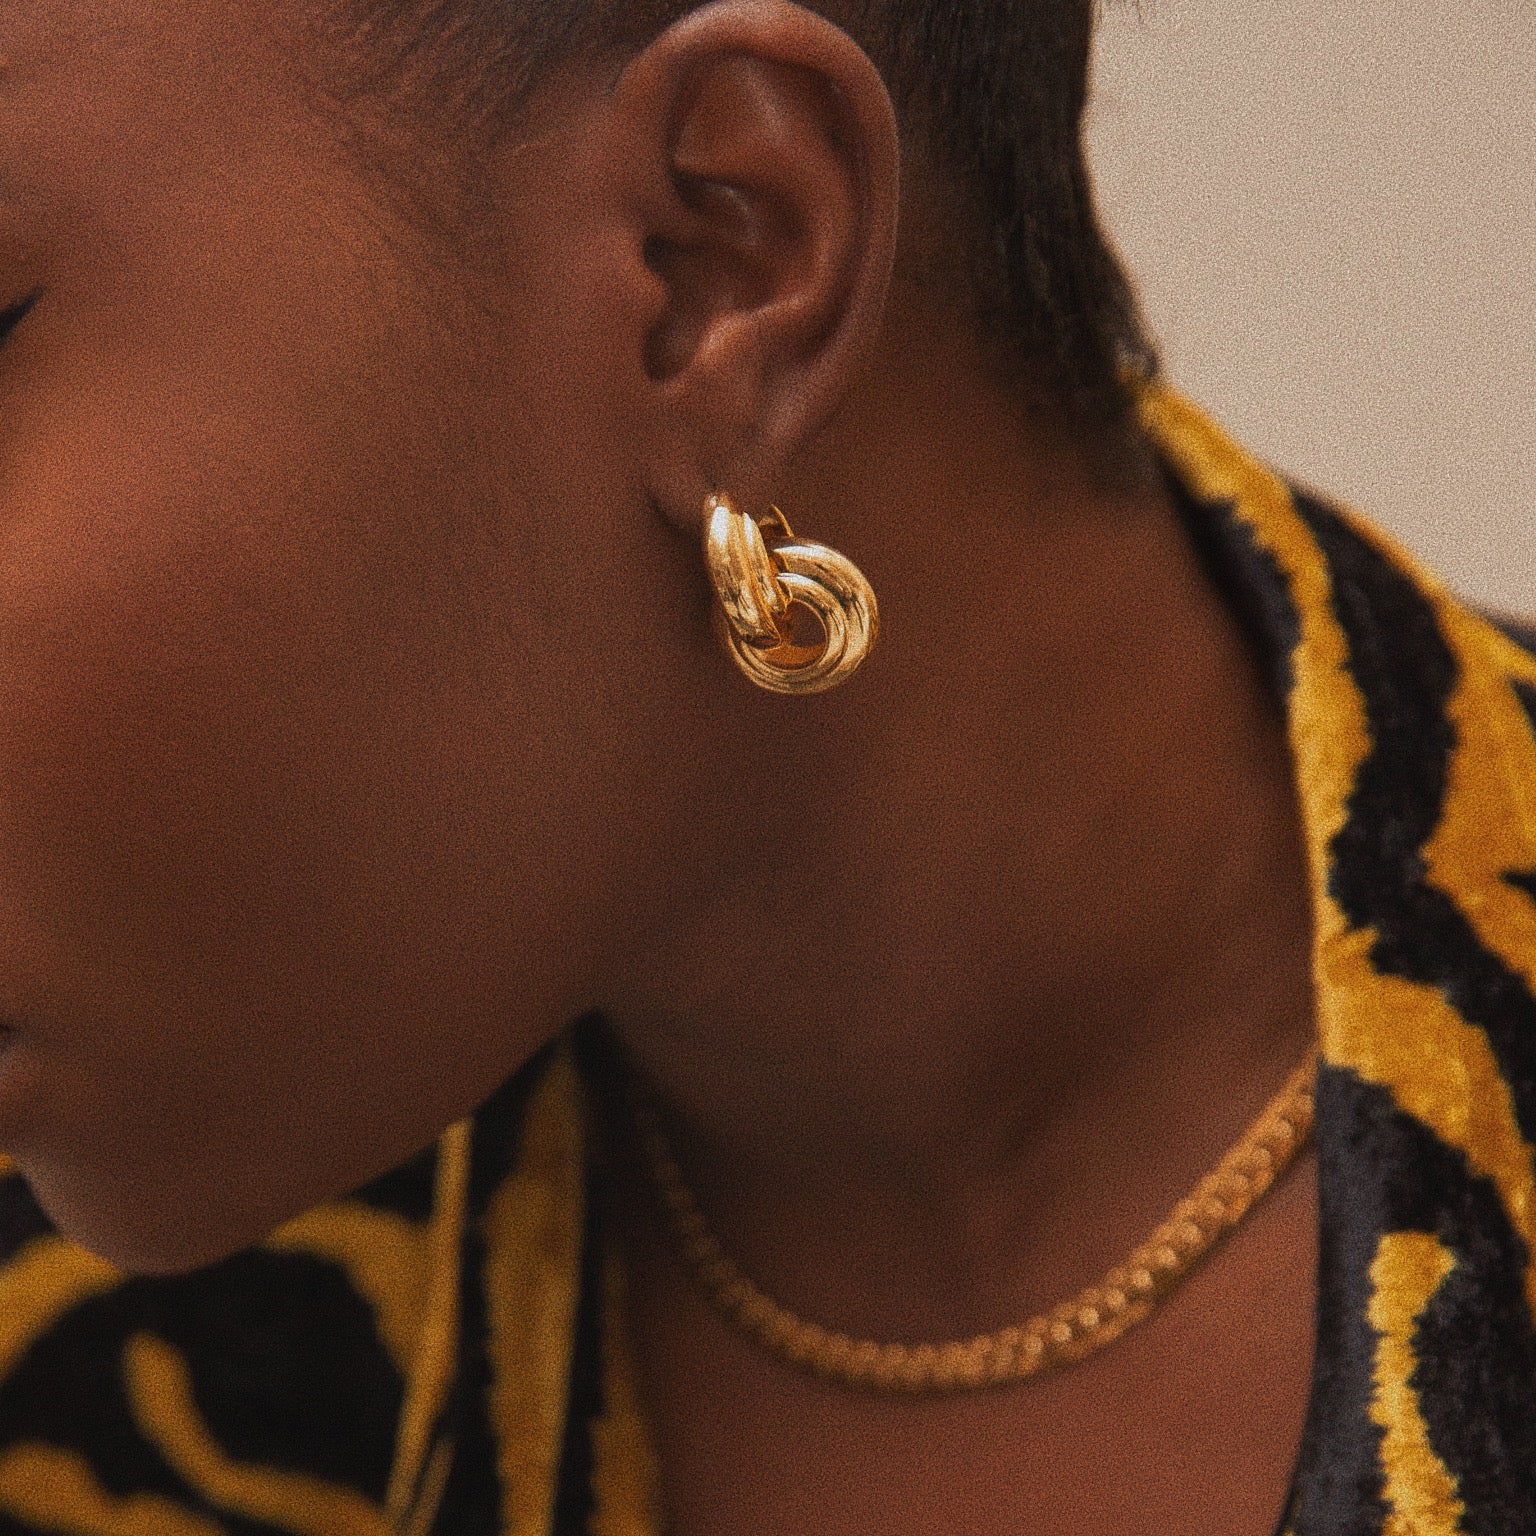 Fisayo Longe in the Anisa Sojka Gold Interlocking Hoop Earrings and Gold Compact Link Necklace